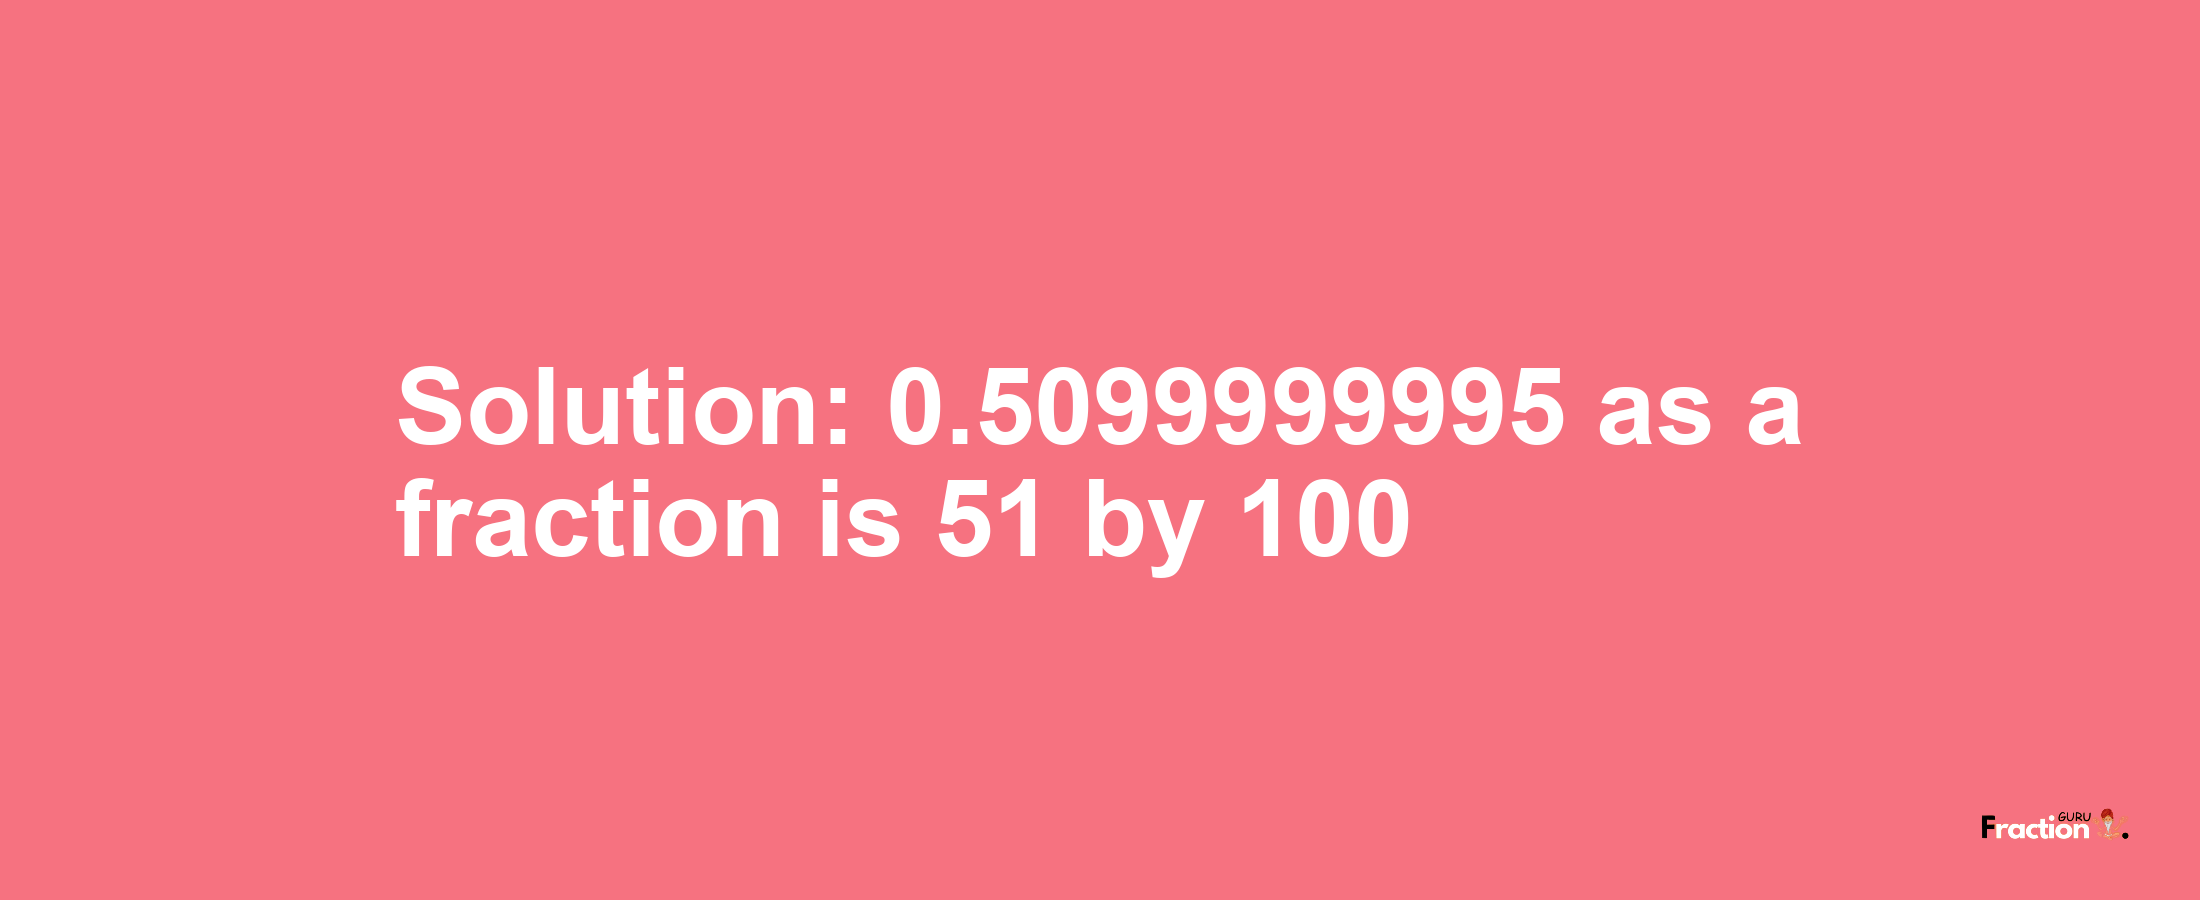 Solution:0.5099999995 as a fraction is 51/100